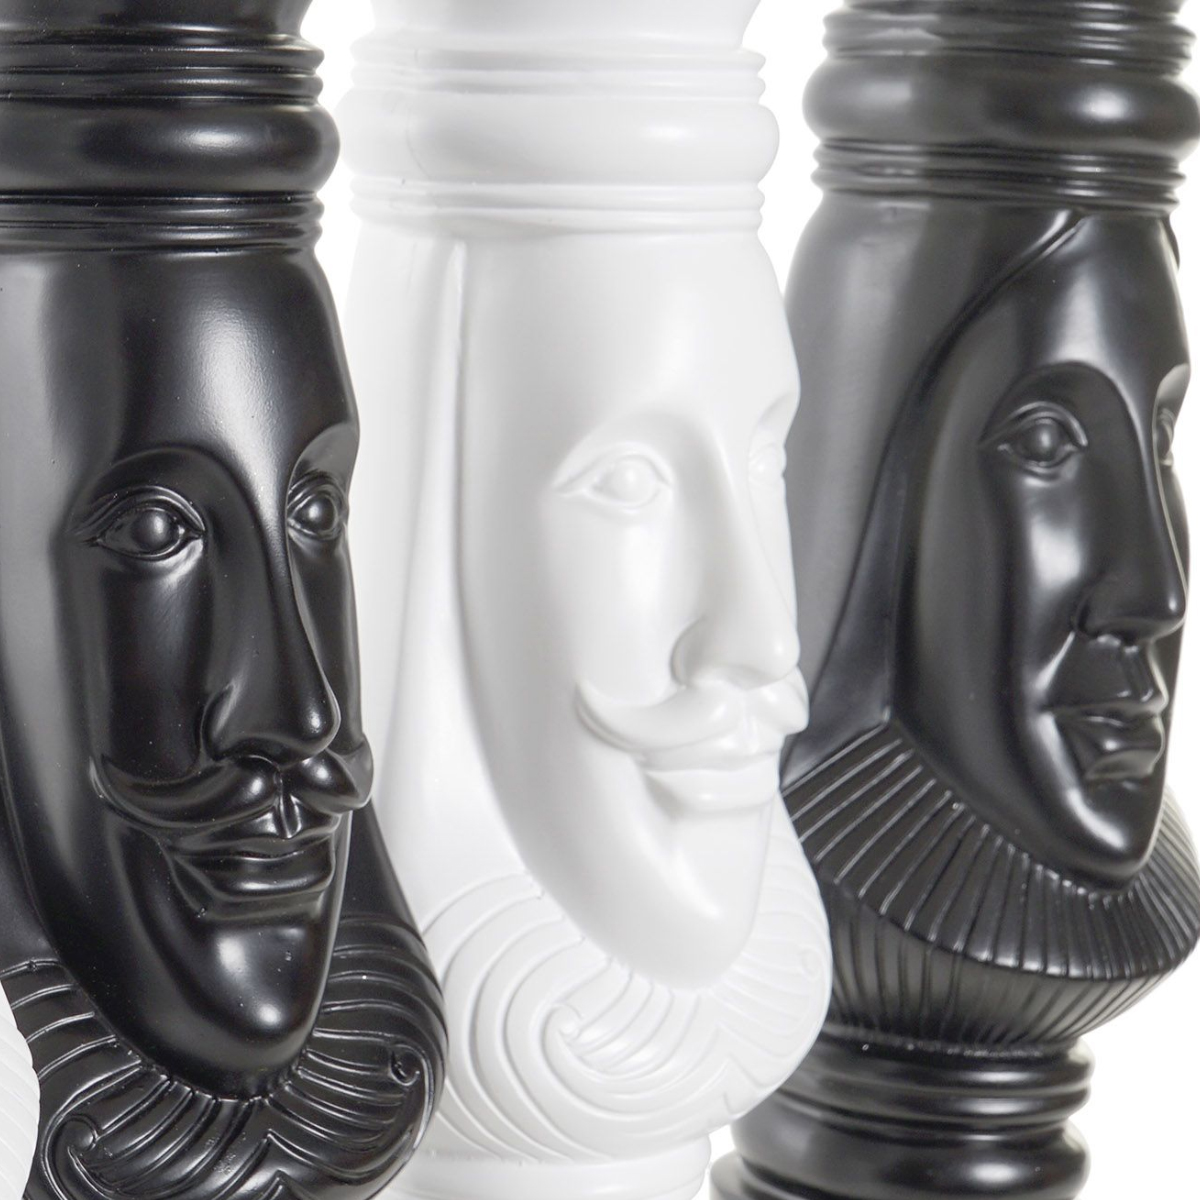 King chess piece figurine in white resin 39 cm